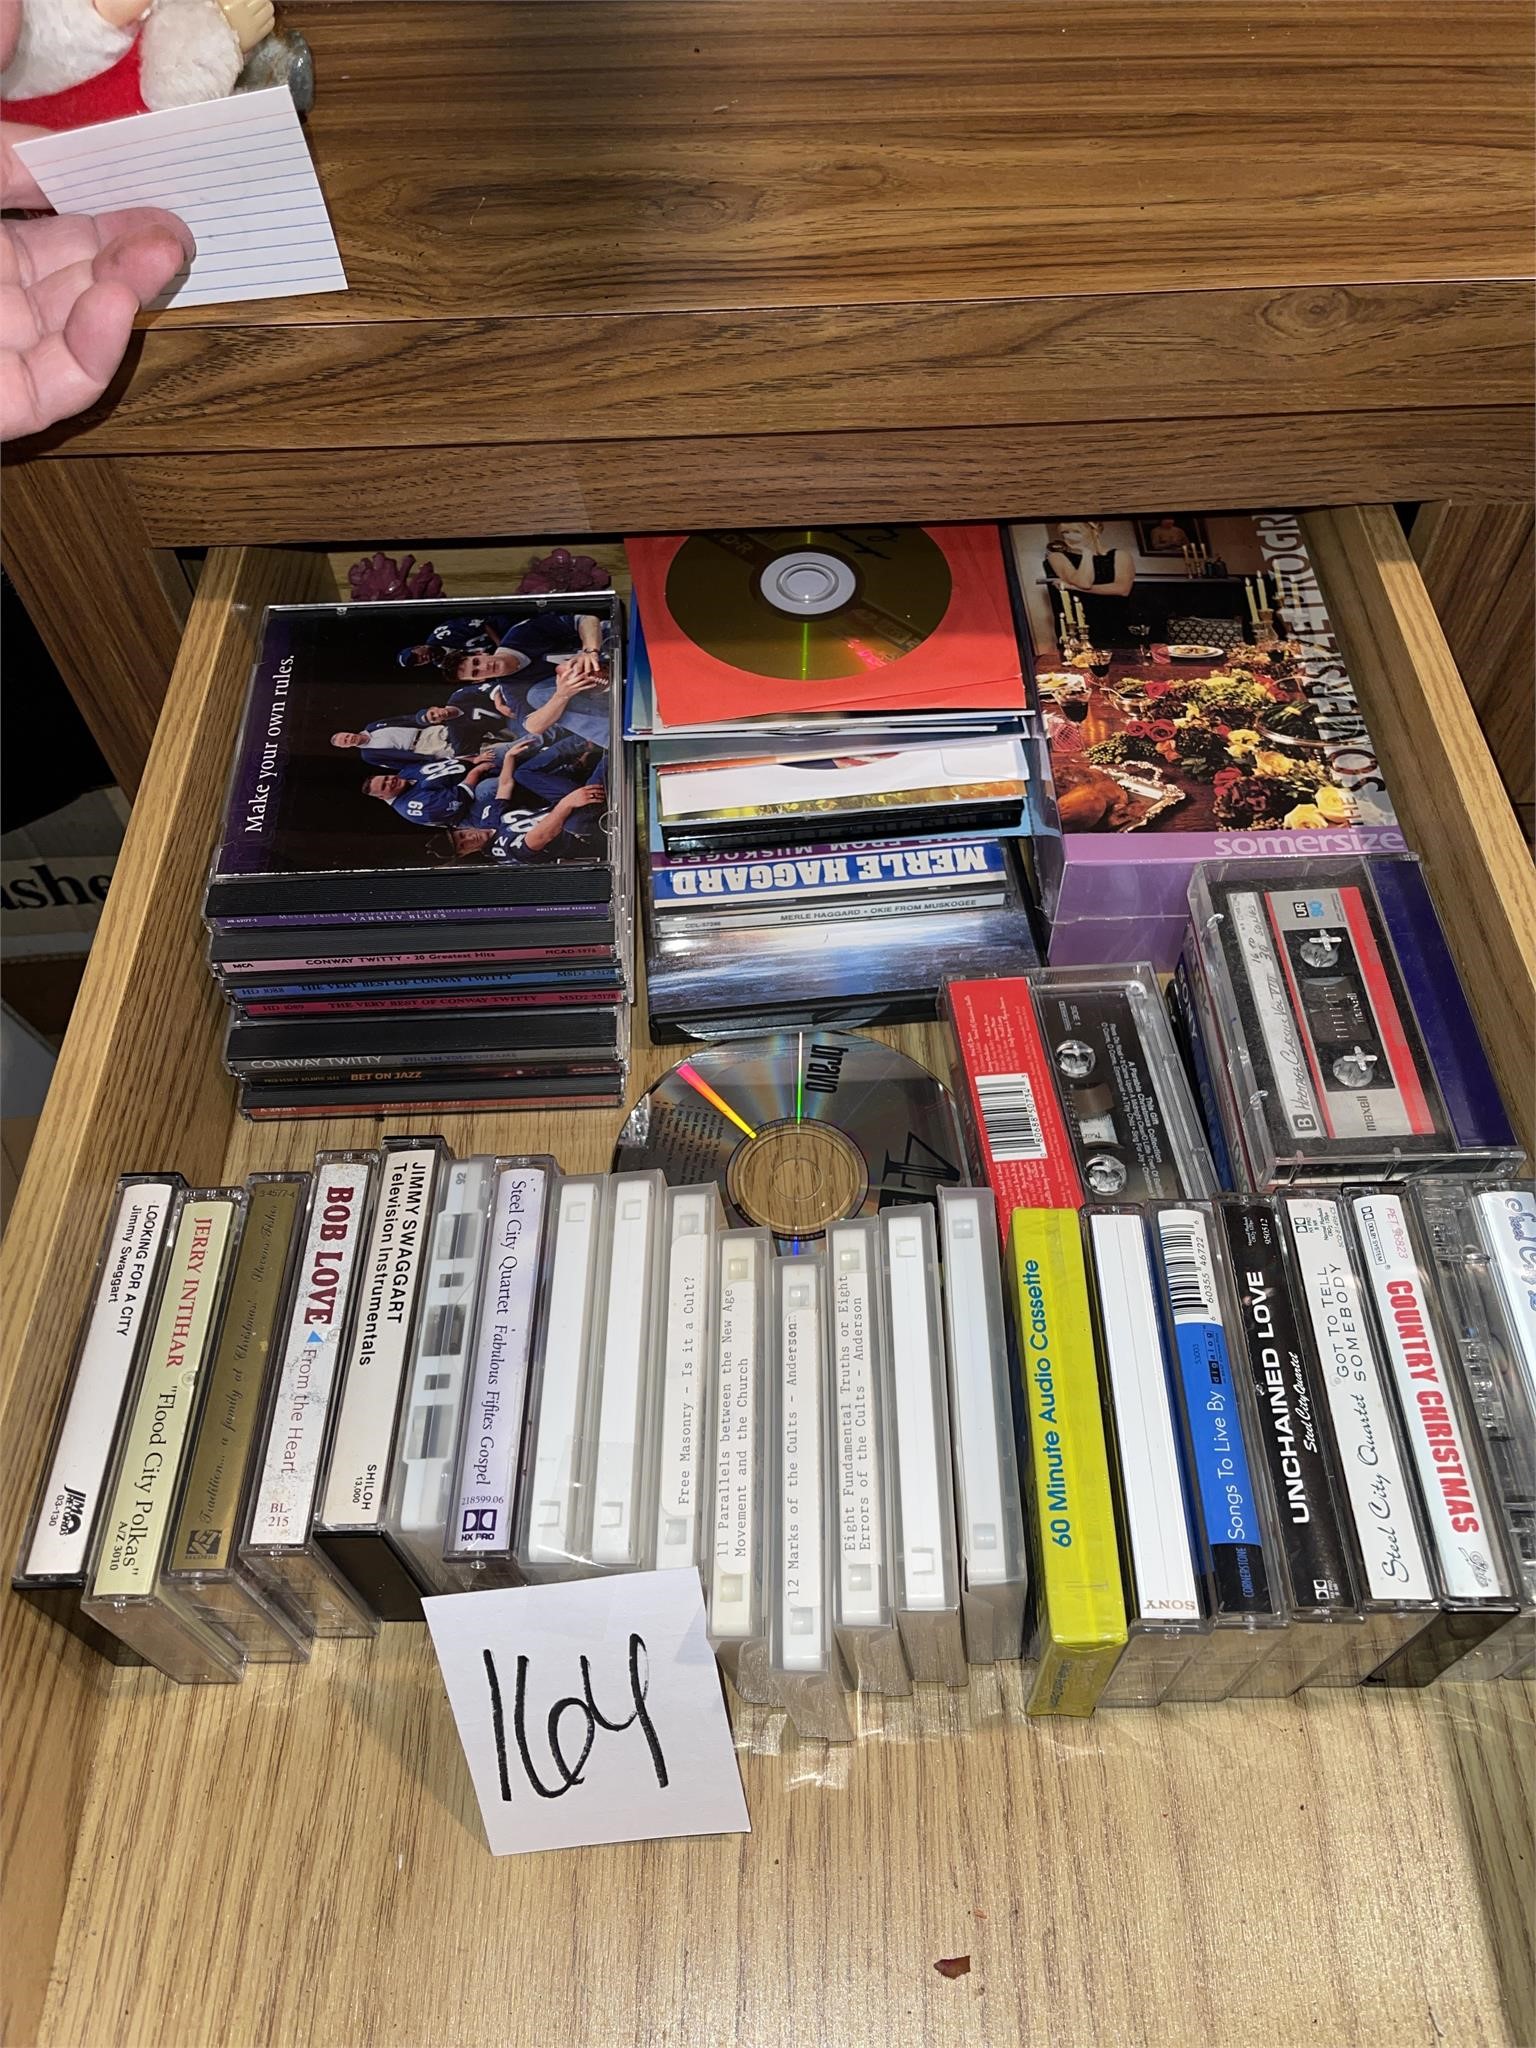 cds cassettes contents of drawer